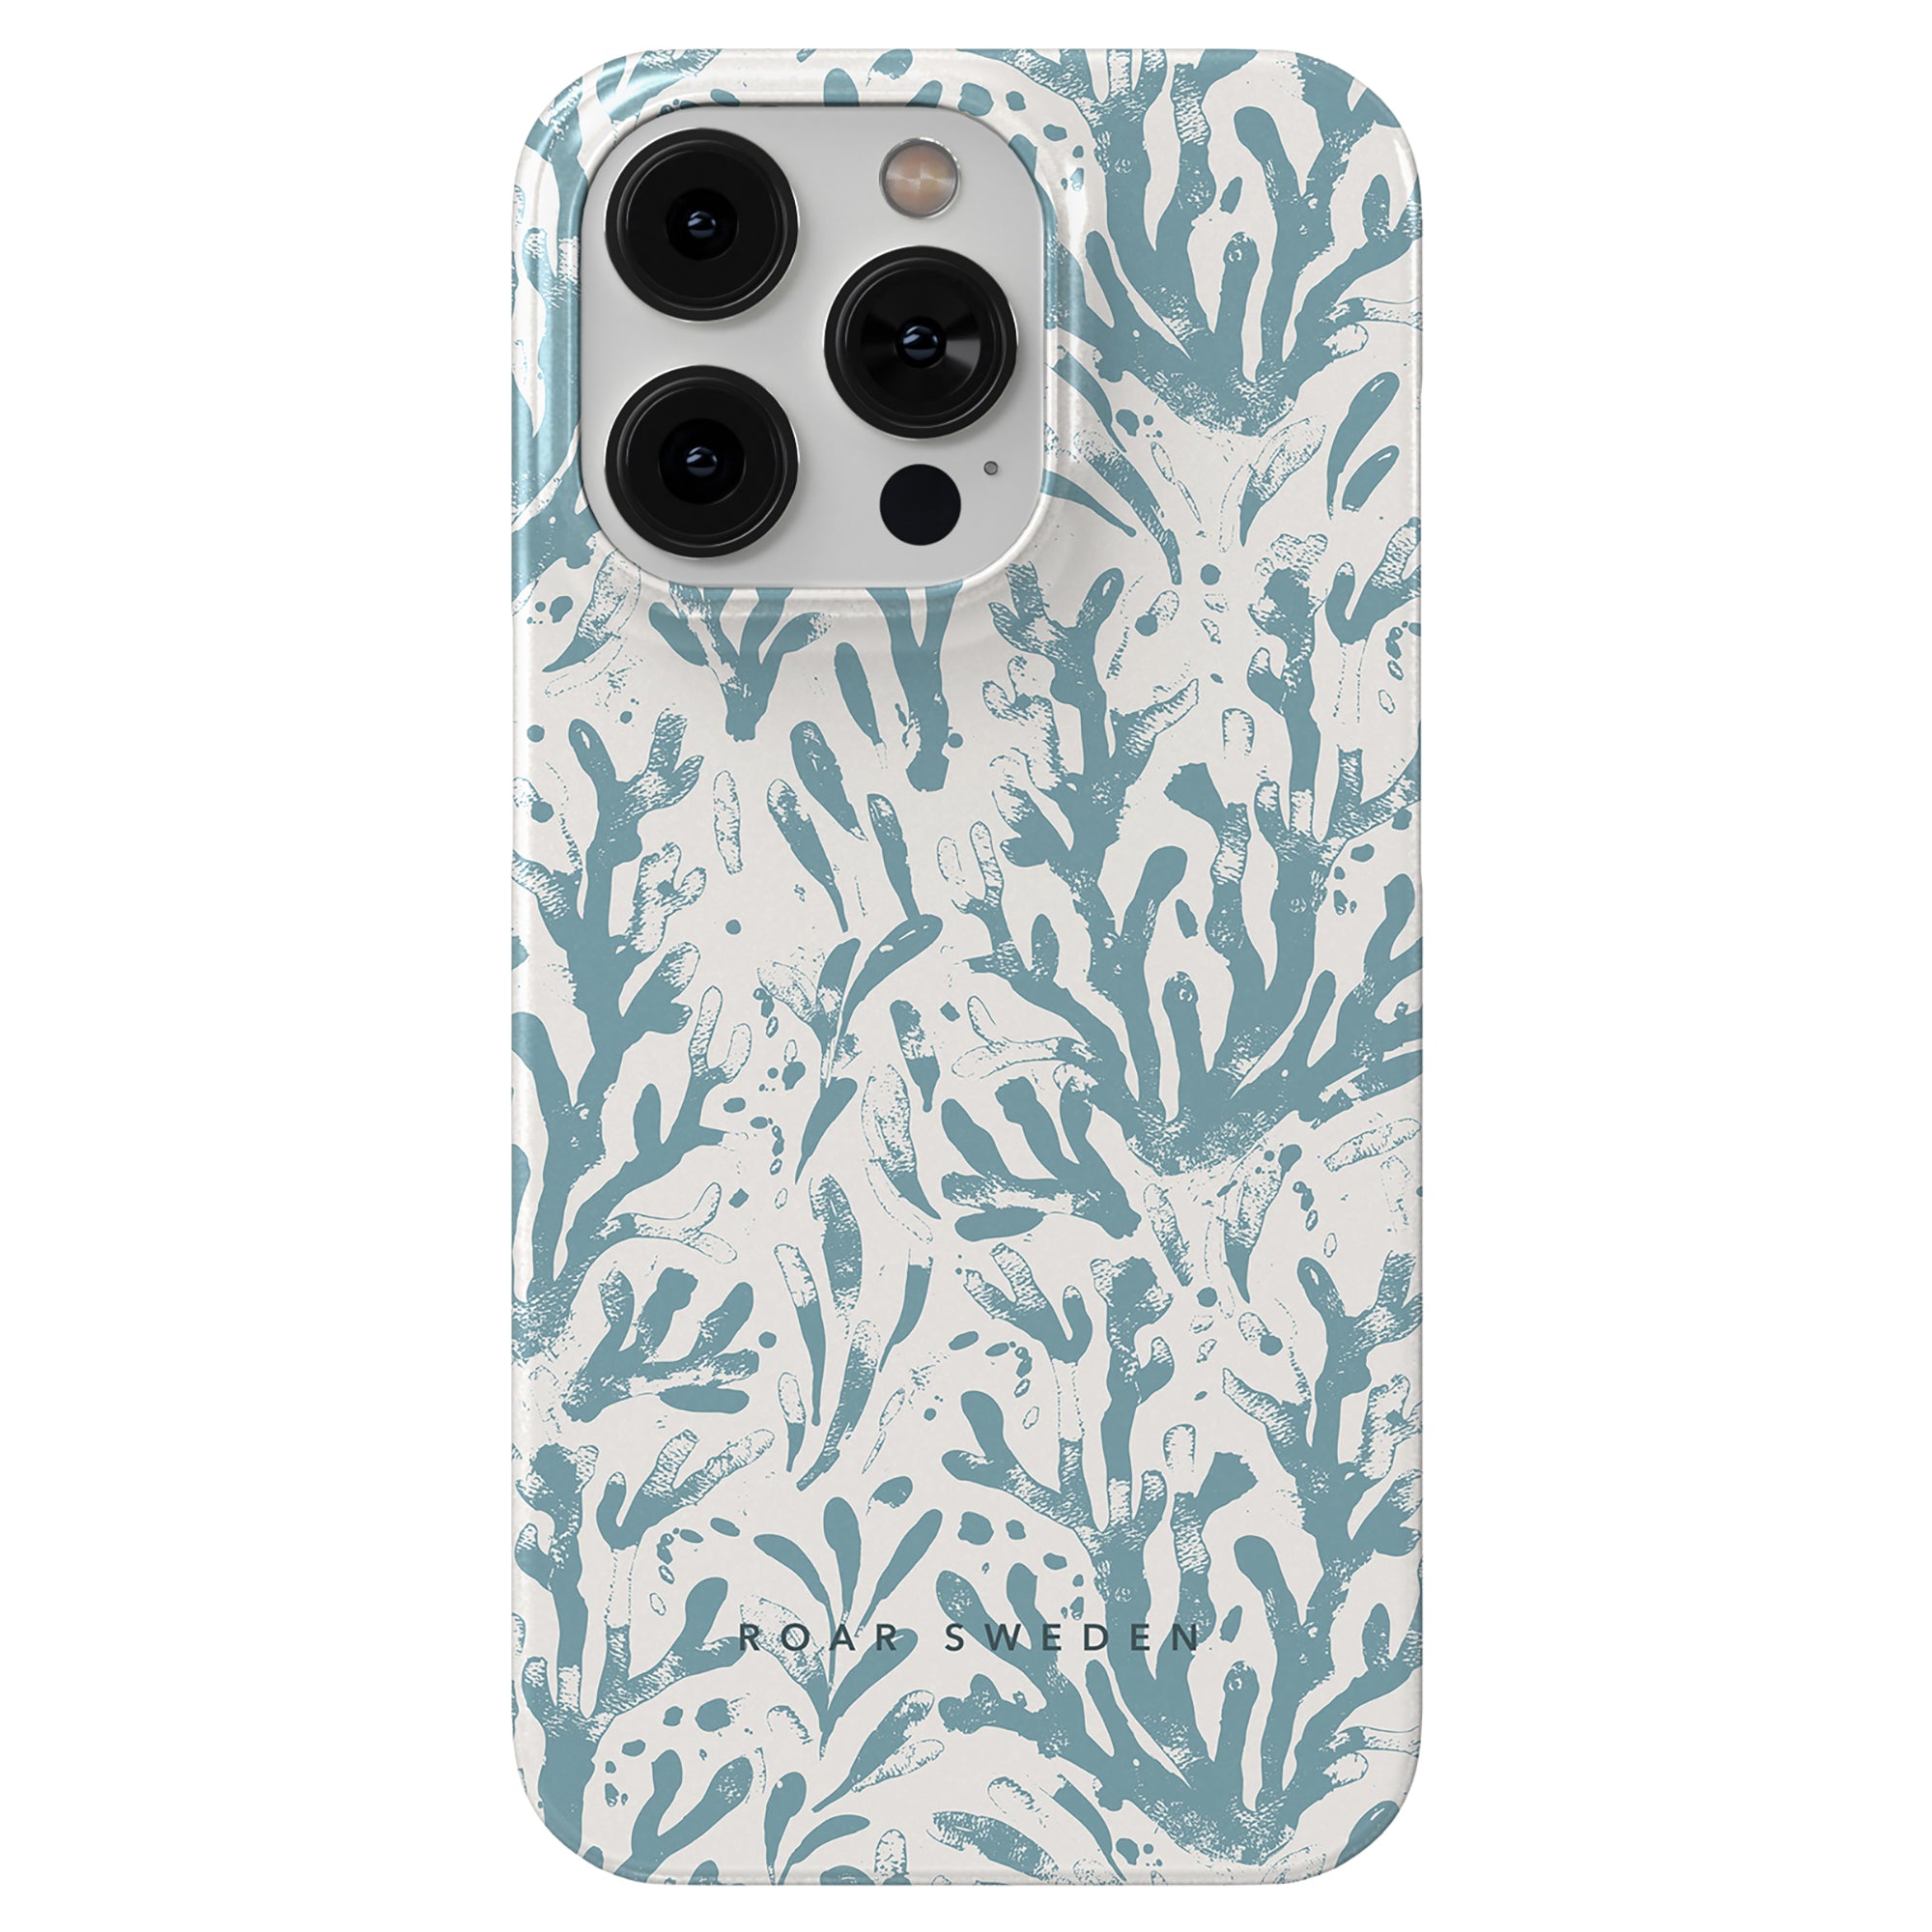 Sea Life - Slim case with a camera cut-out for a dual-lens camera.